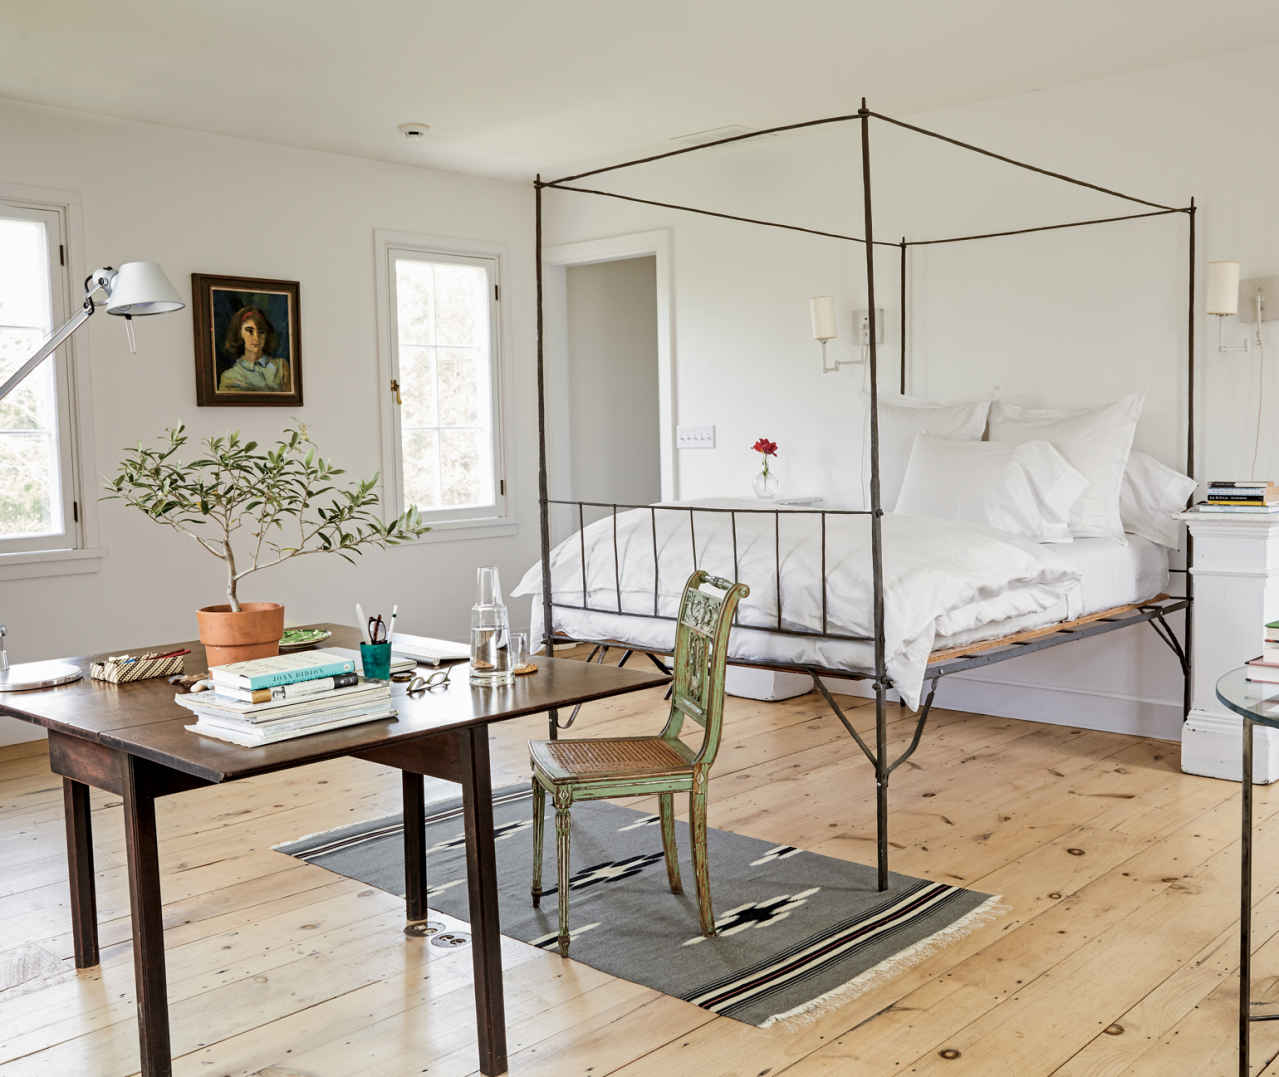 VIEW FROM THE TOP. The exaggerated height of the metal bedframe is mirrored in Artemide’s modern “Tolomeo” desk lamp. It’s this common ground that makes mixing pieces from different eras successful.